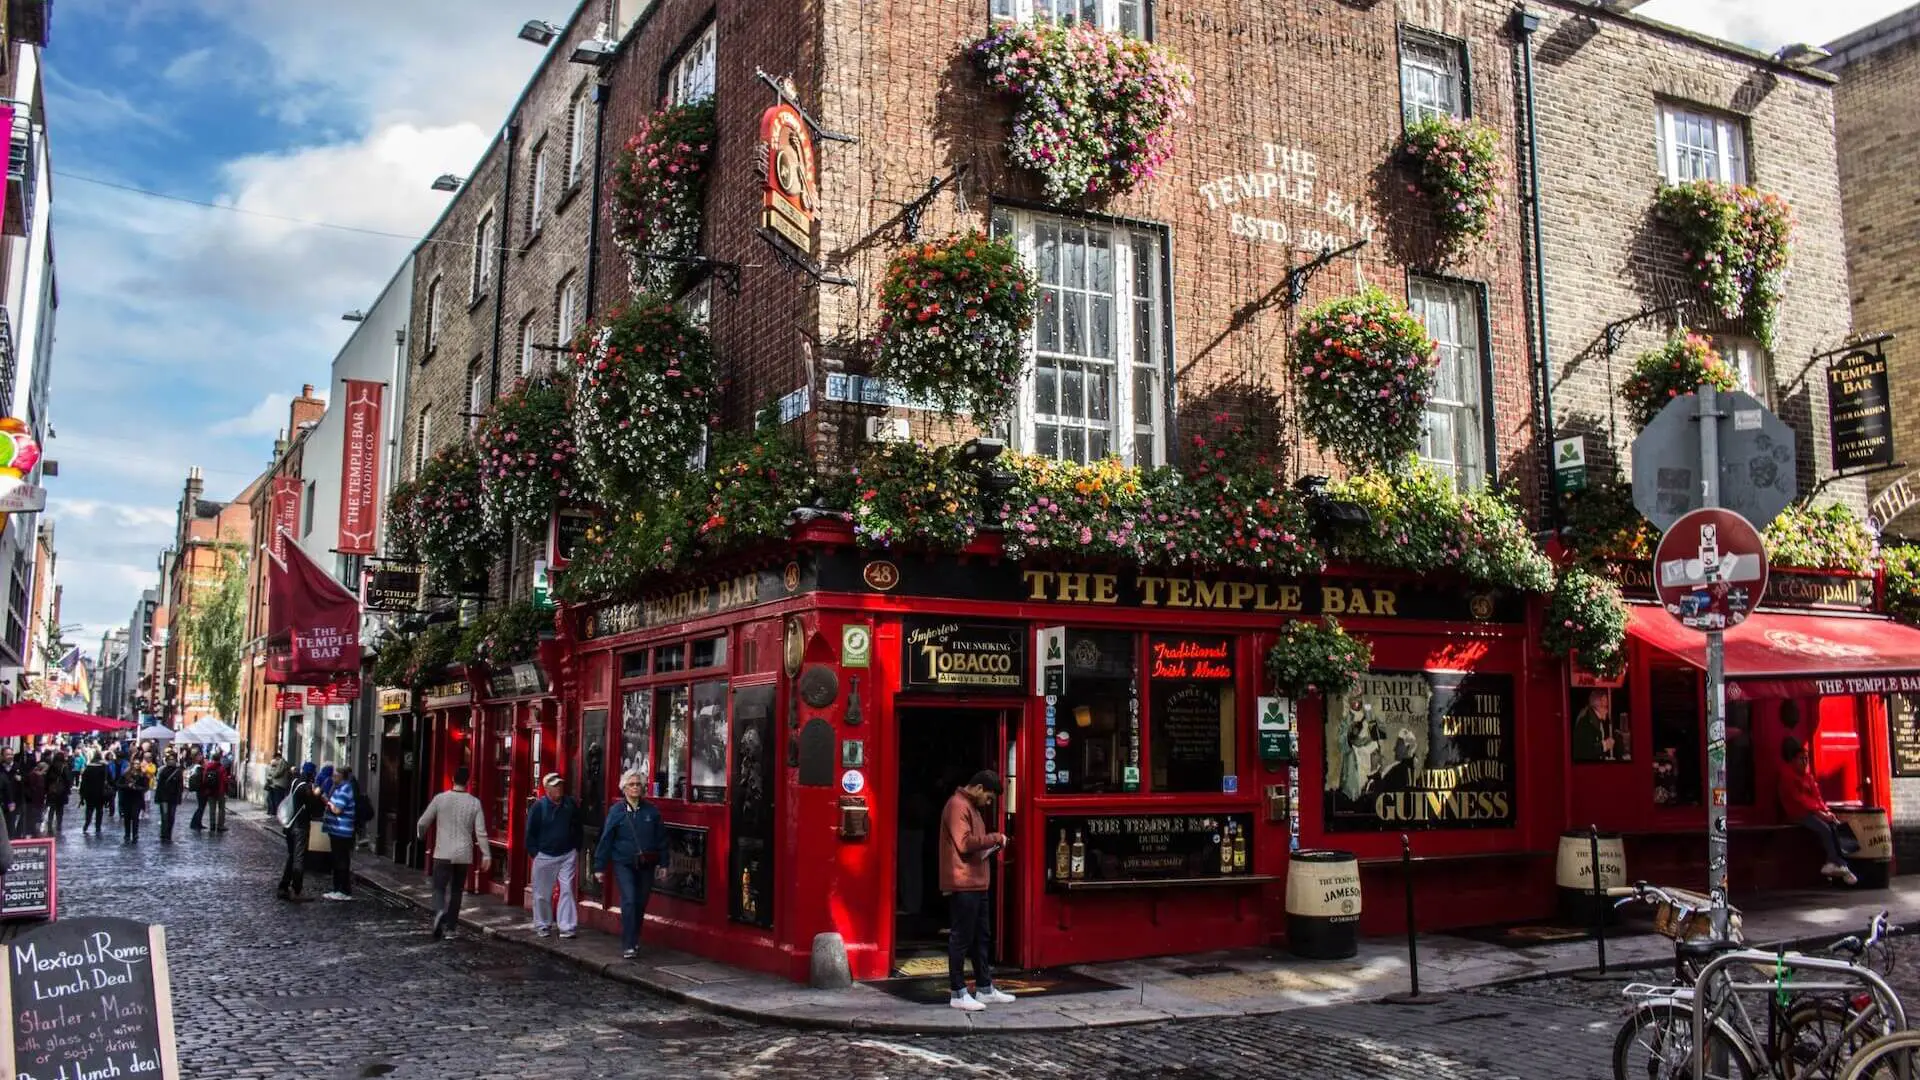 A vibrant street scene with pedestrians near the flower-adorned Temple Bar pub in Dublin, perfect for Ireland Tours.